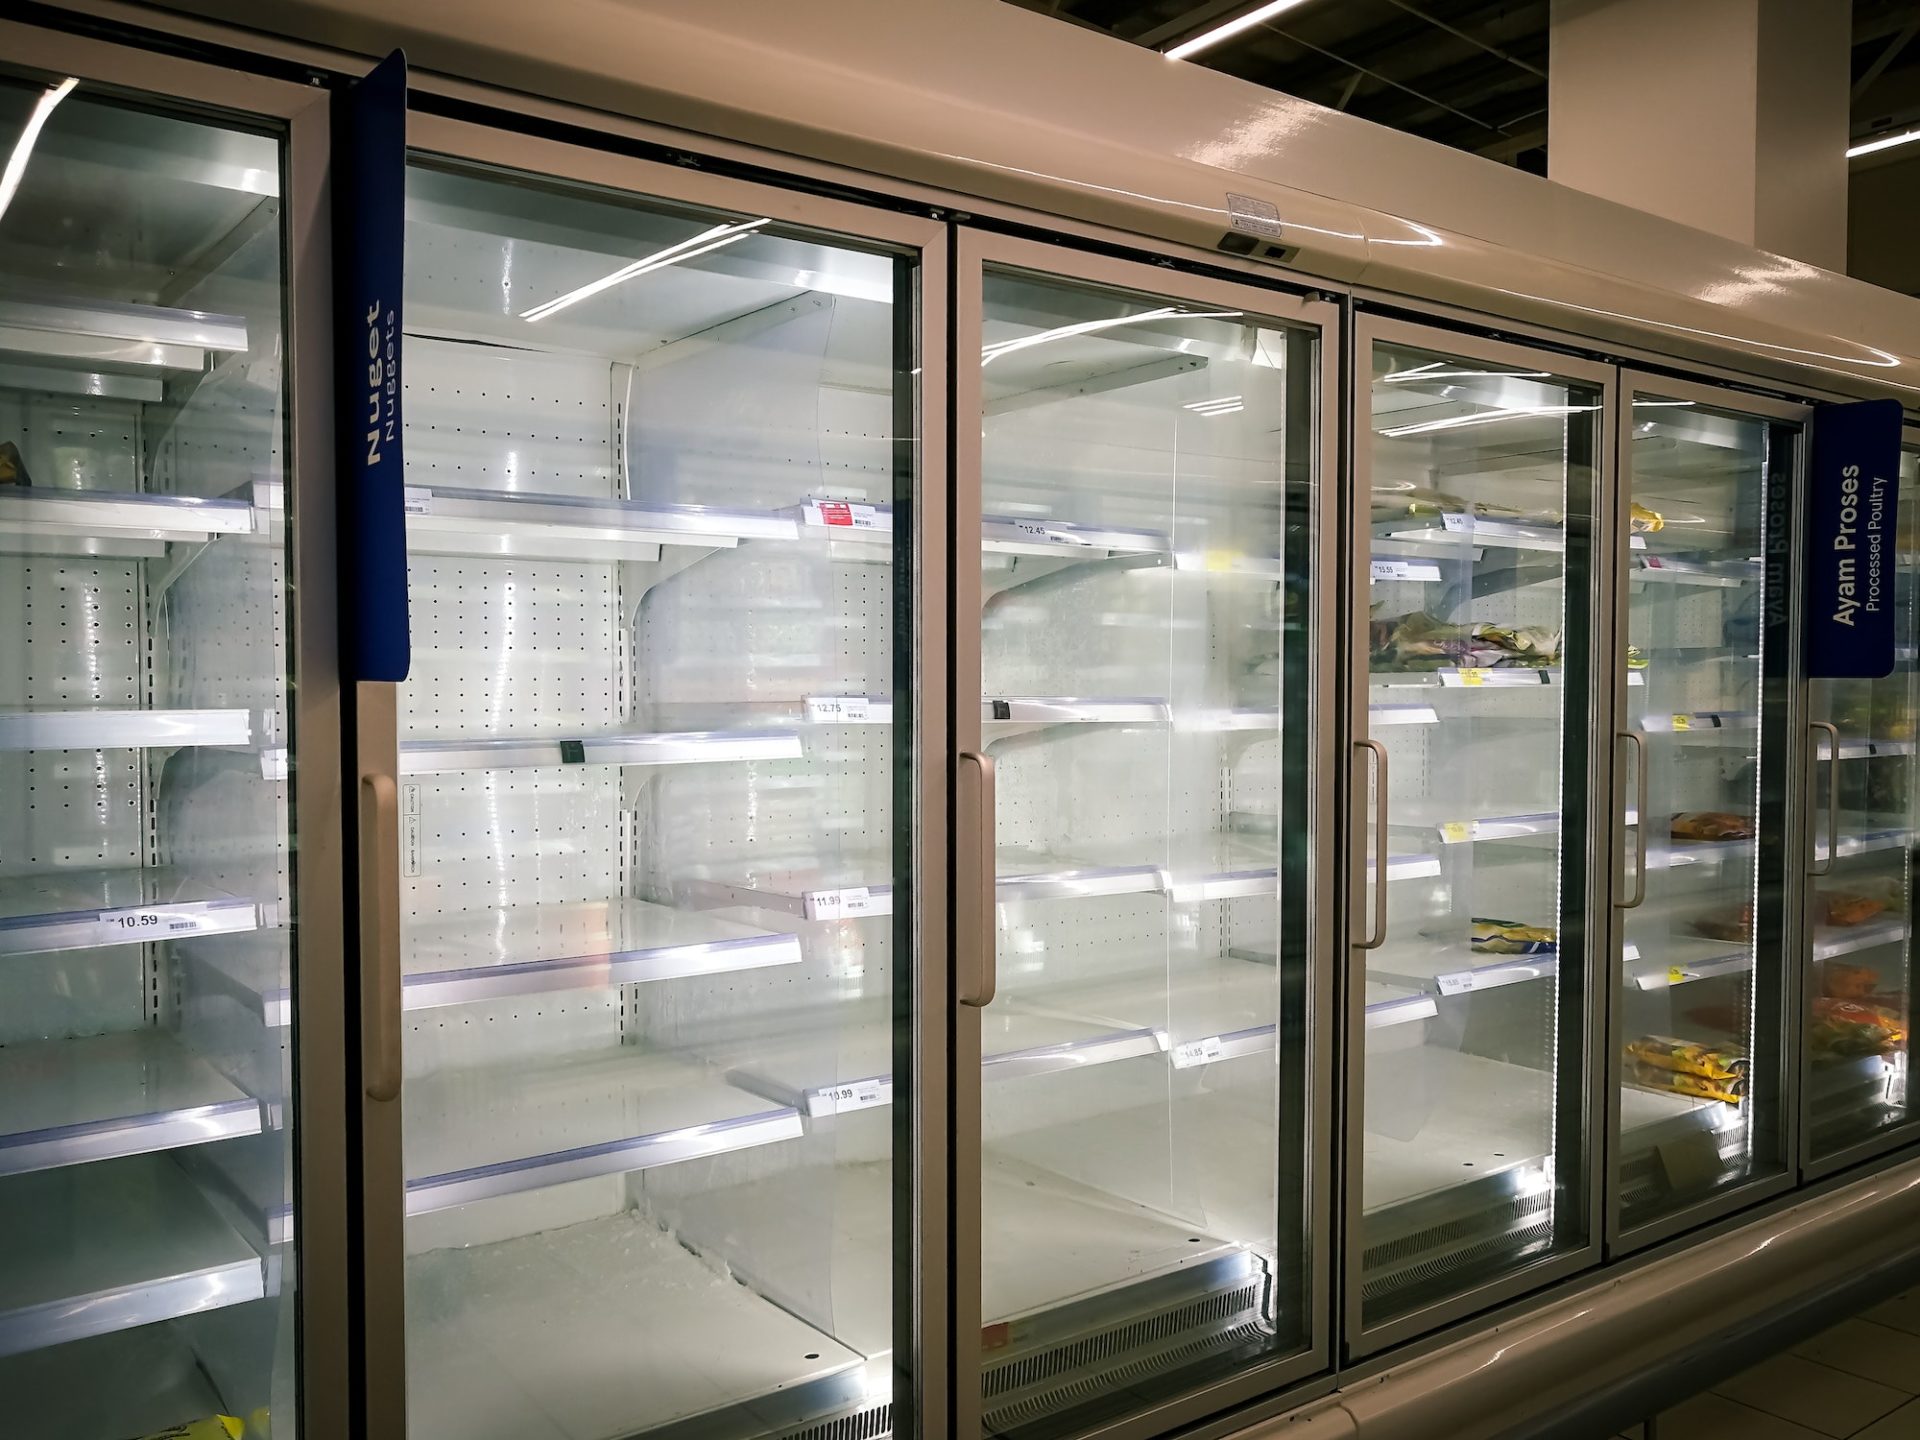 empty freezer in the supermarket during the lockdown of corona virus covid 19 pandemic